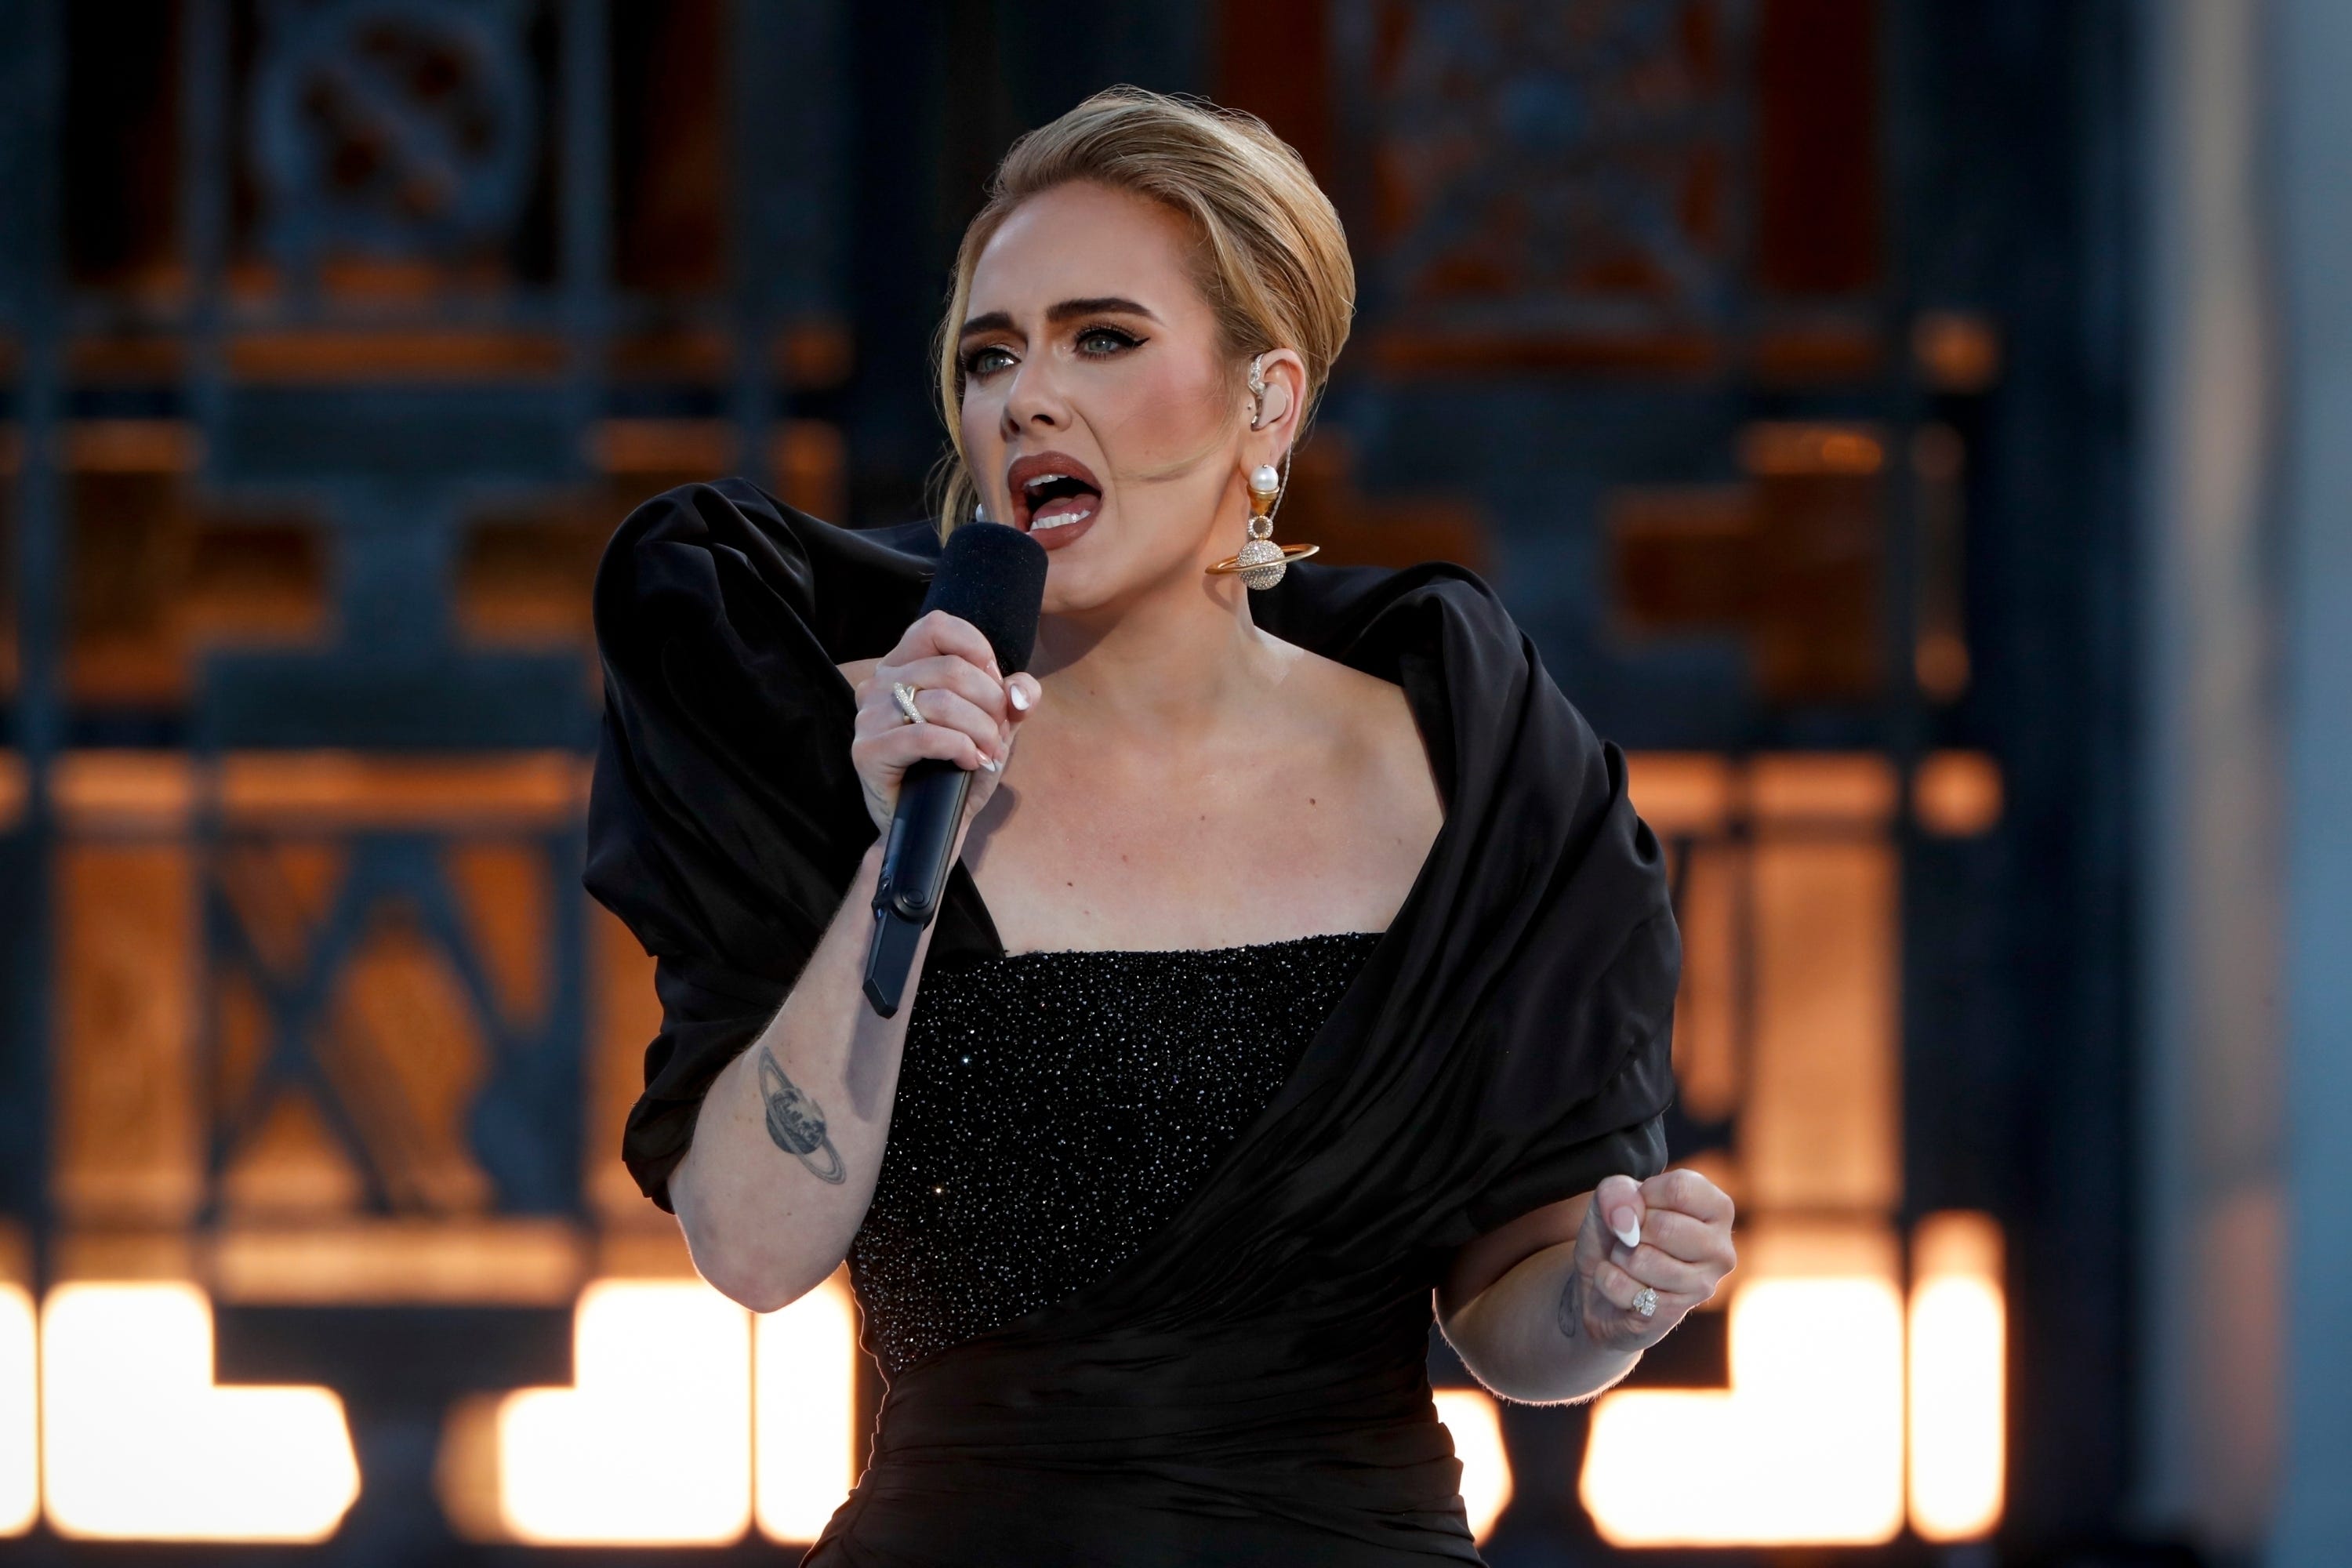 Adele is up seven more awards at the 2023 Grammy Awards after her first significant performance of 2022 at Hyde Park 